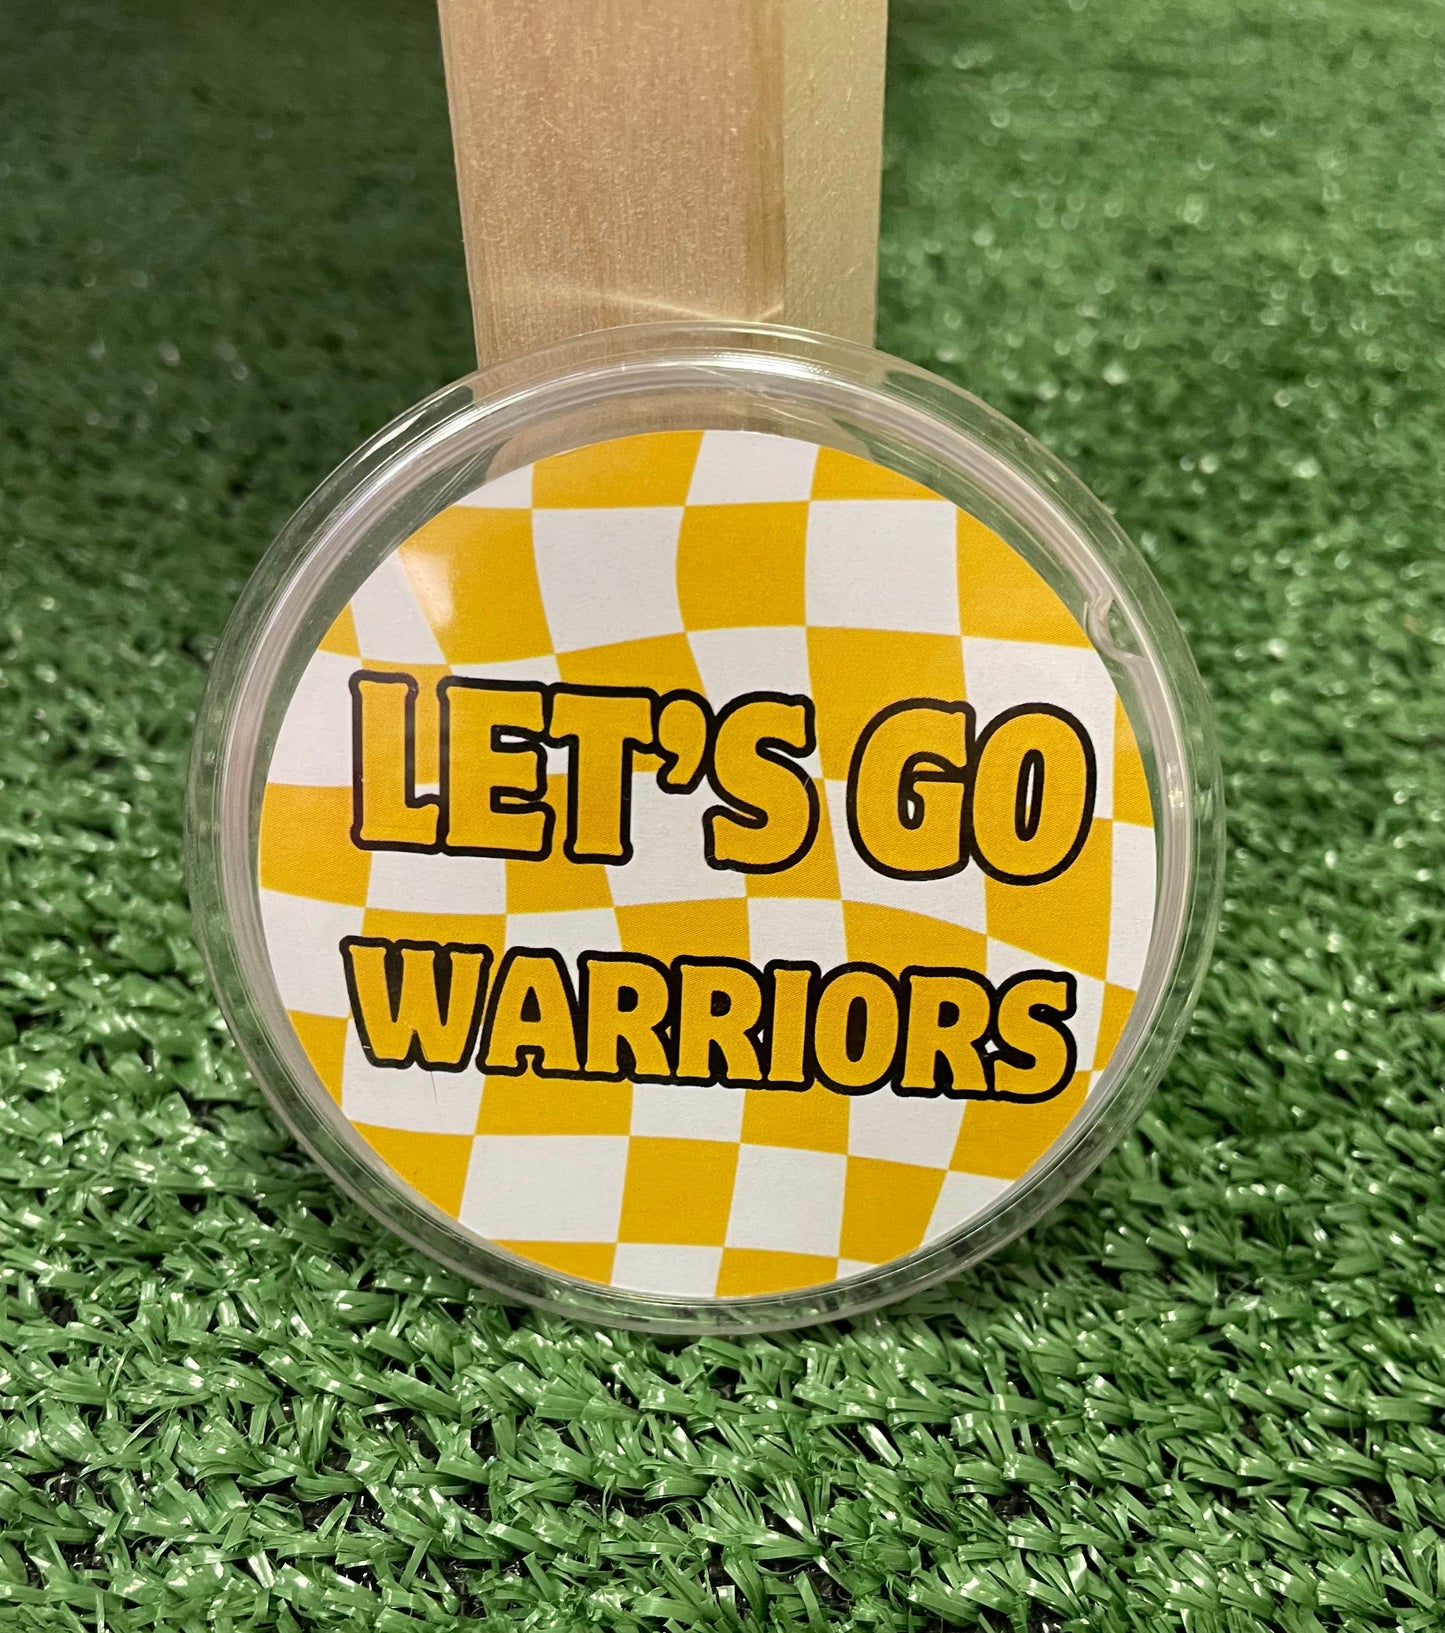 Game Day Buttons